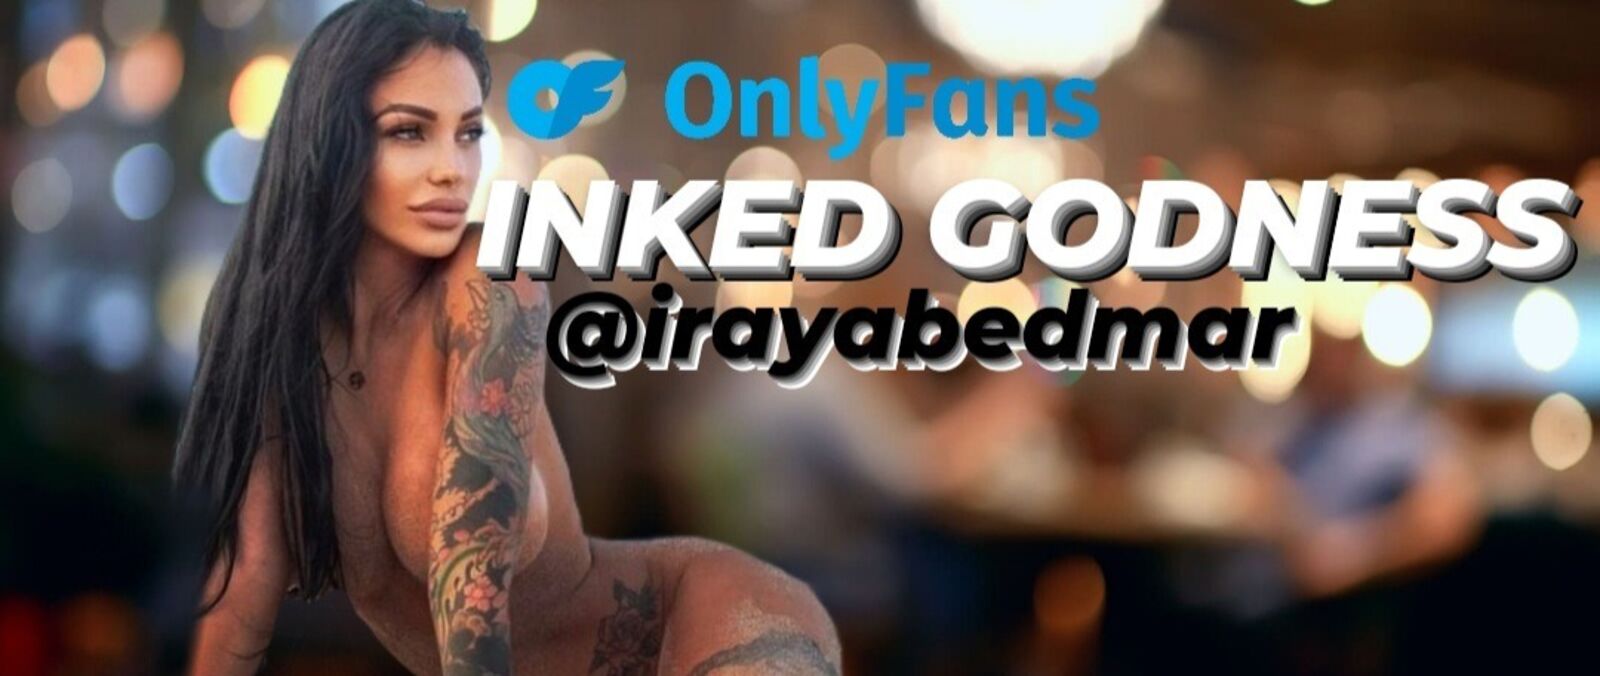 See INKED GODNESS🦊CUSTOM ⚠️VIDEOCALL💦SEXTING profile